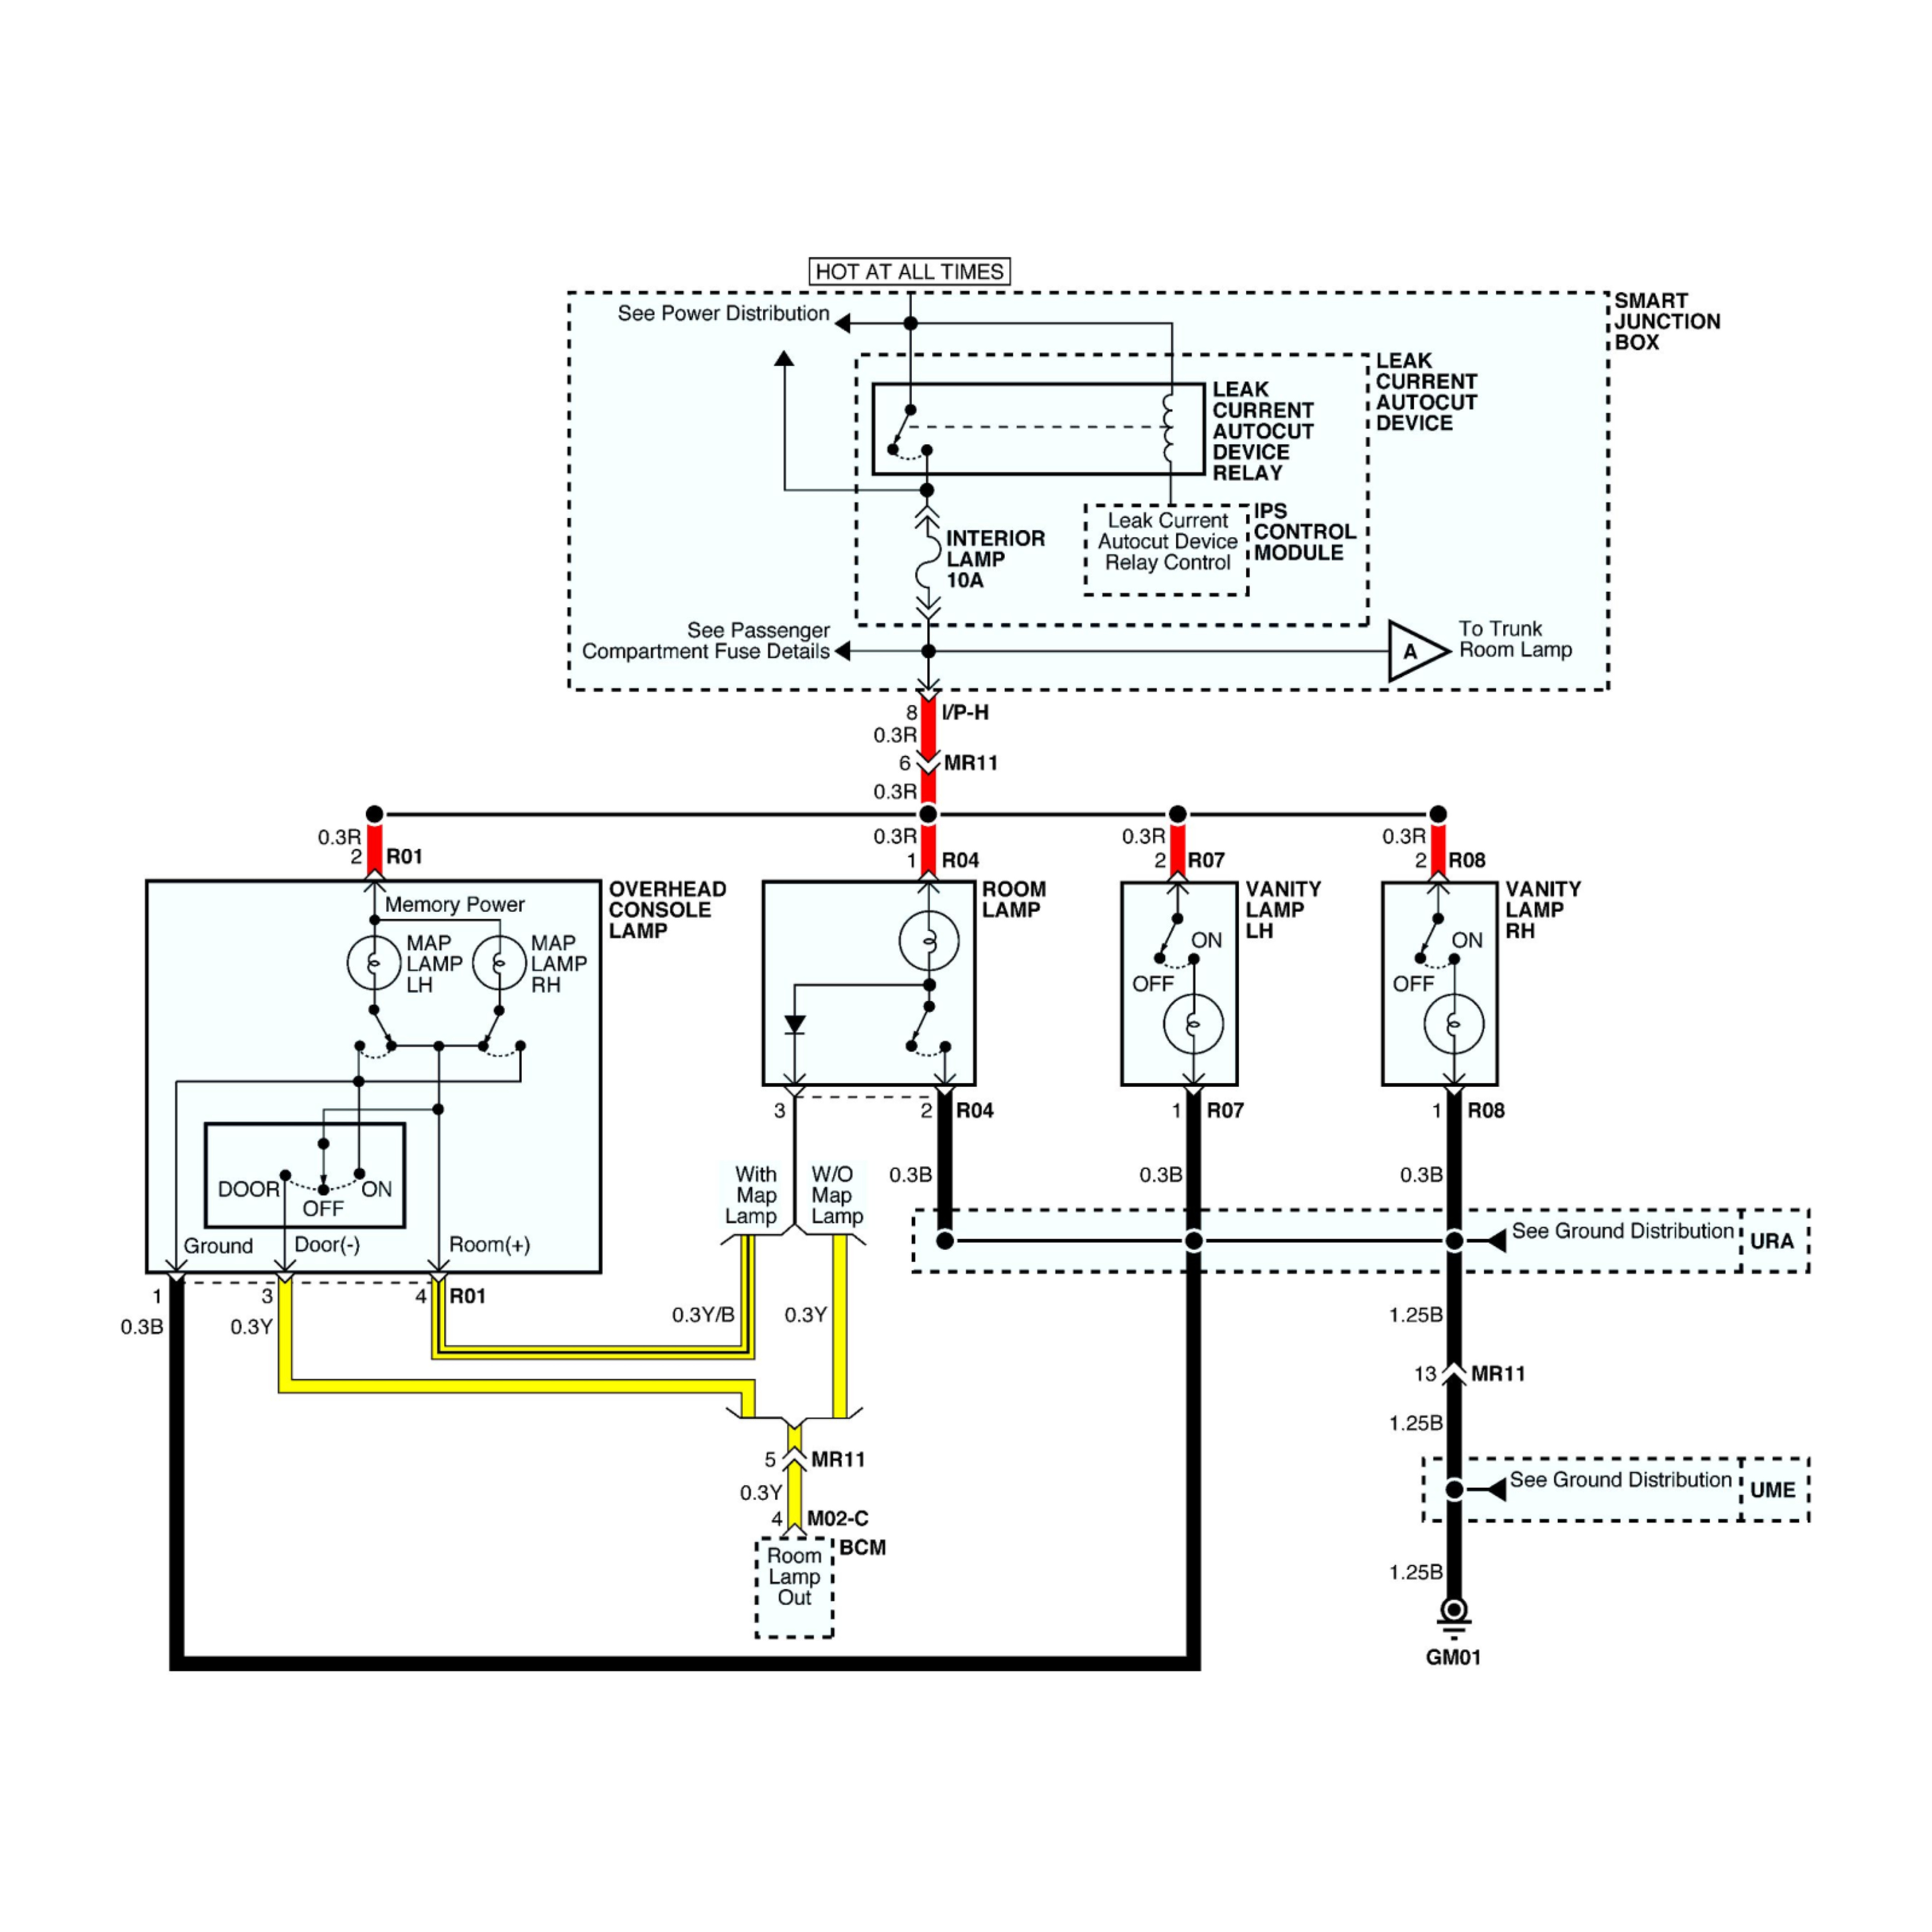 2007 Ford F-150 wiring diagrams example